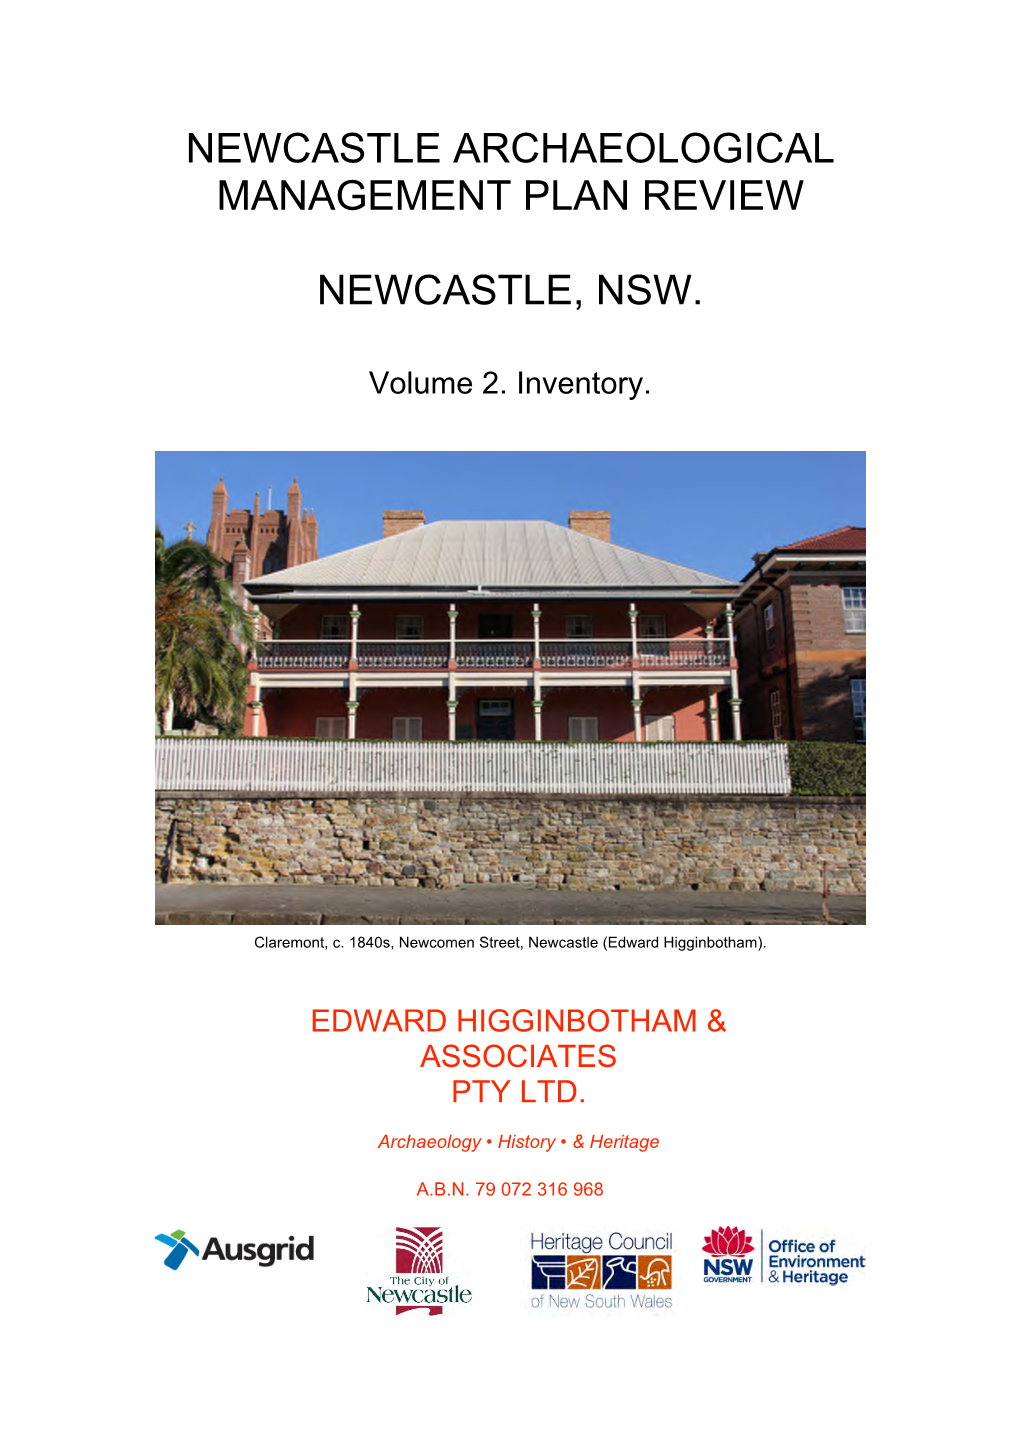 Newcastle Archaeological Management Plan Review 2013 Is Presented in the Following Format